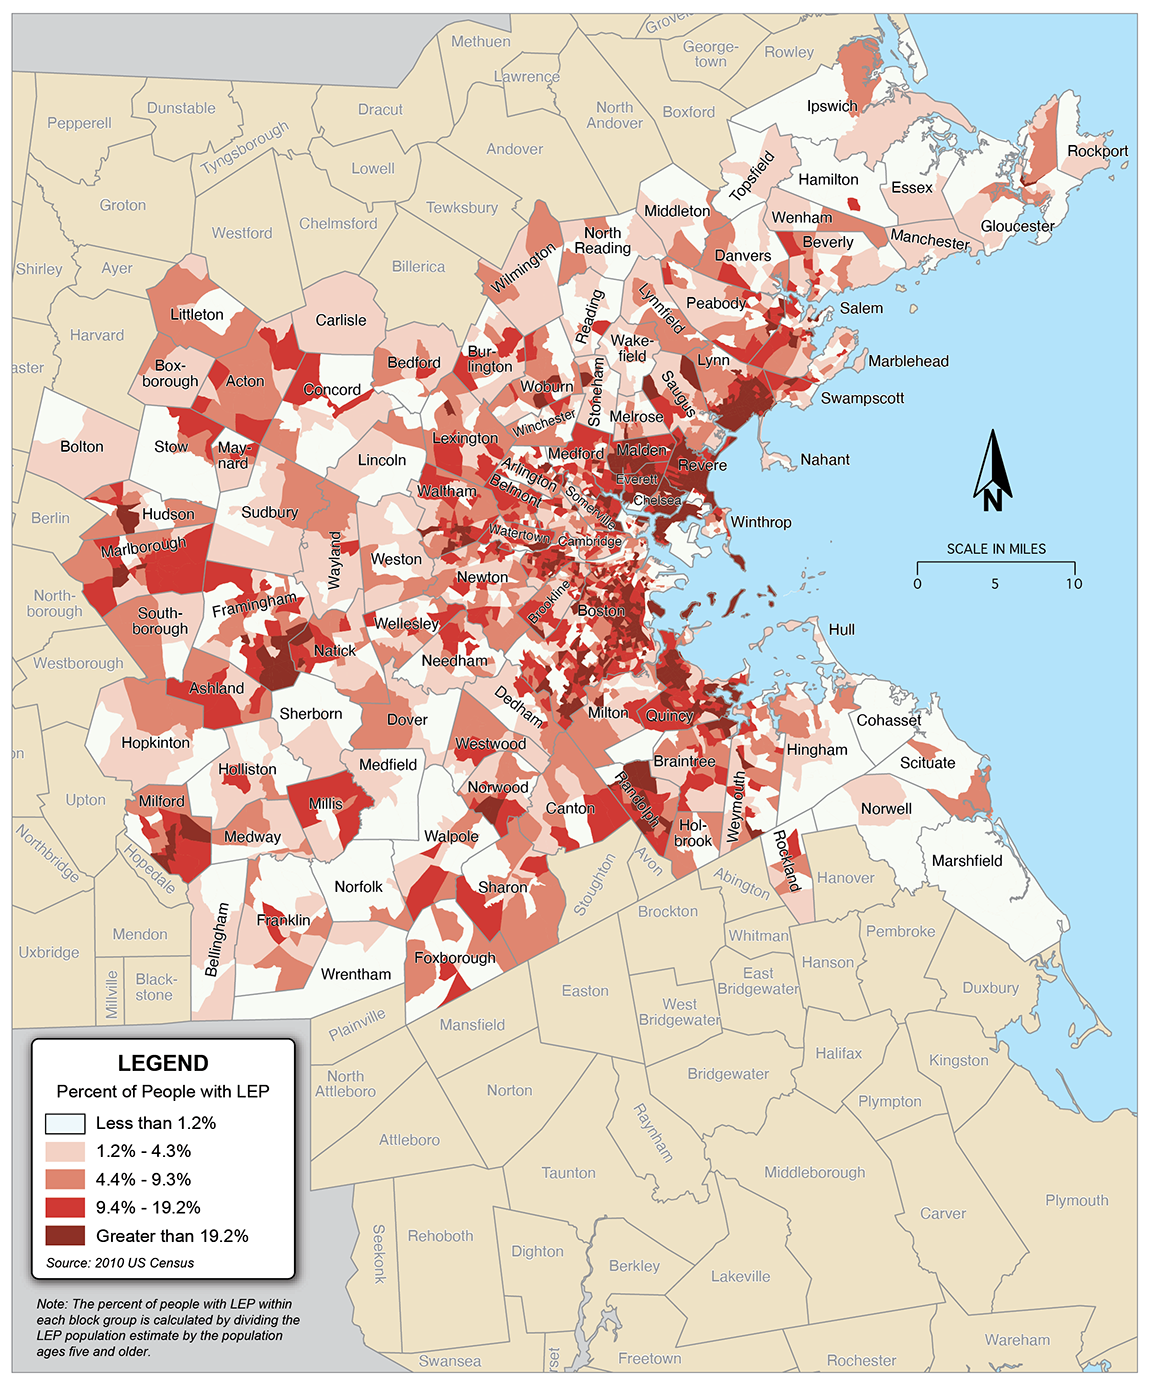 Figure 6-4 is a map showing the percent of the population that has limited English proficiency in each block group across the 97 communities in the Boston region.